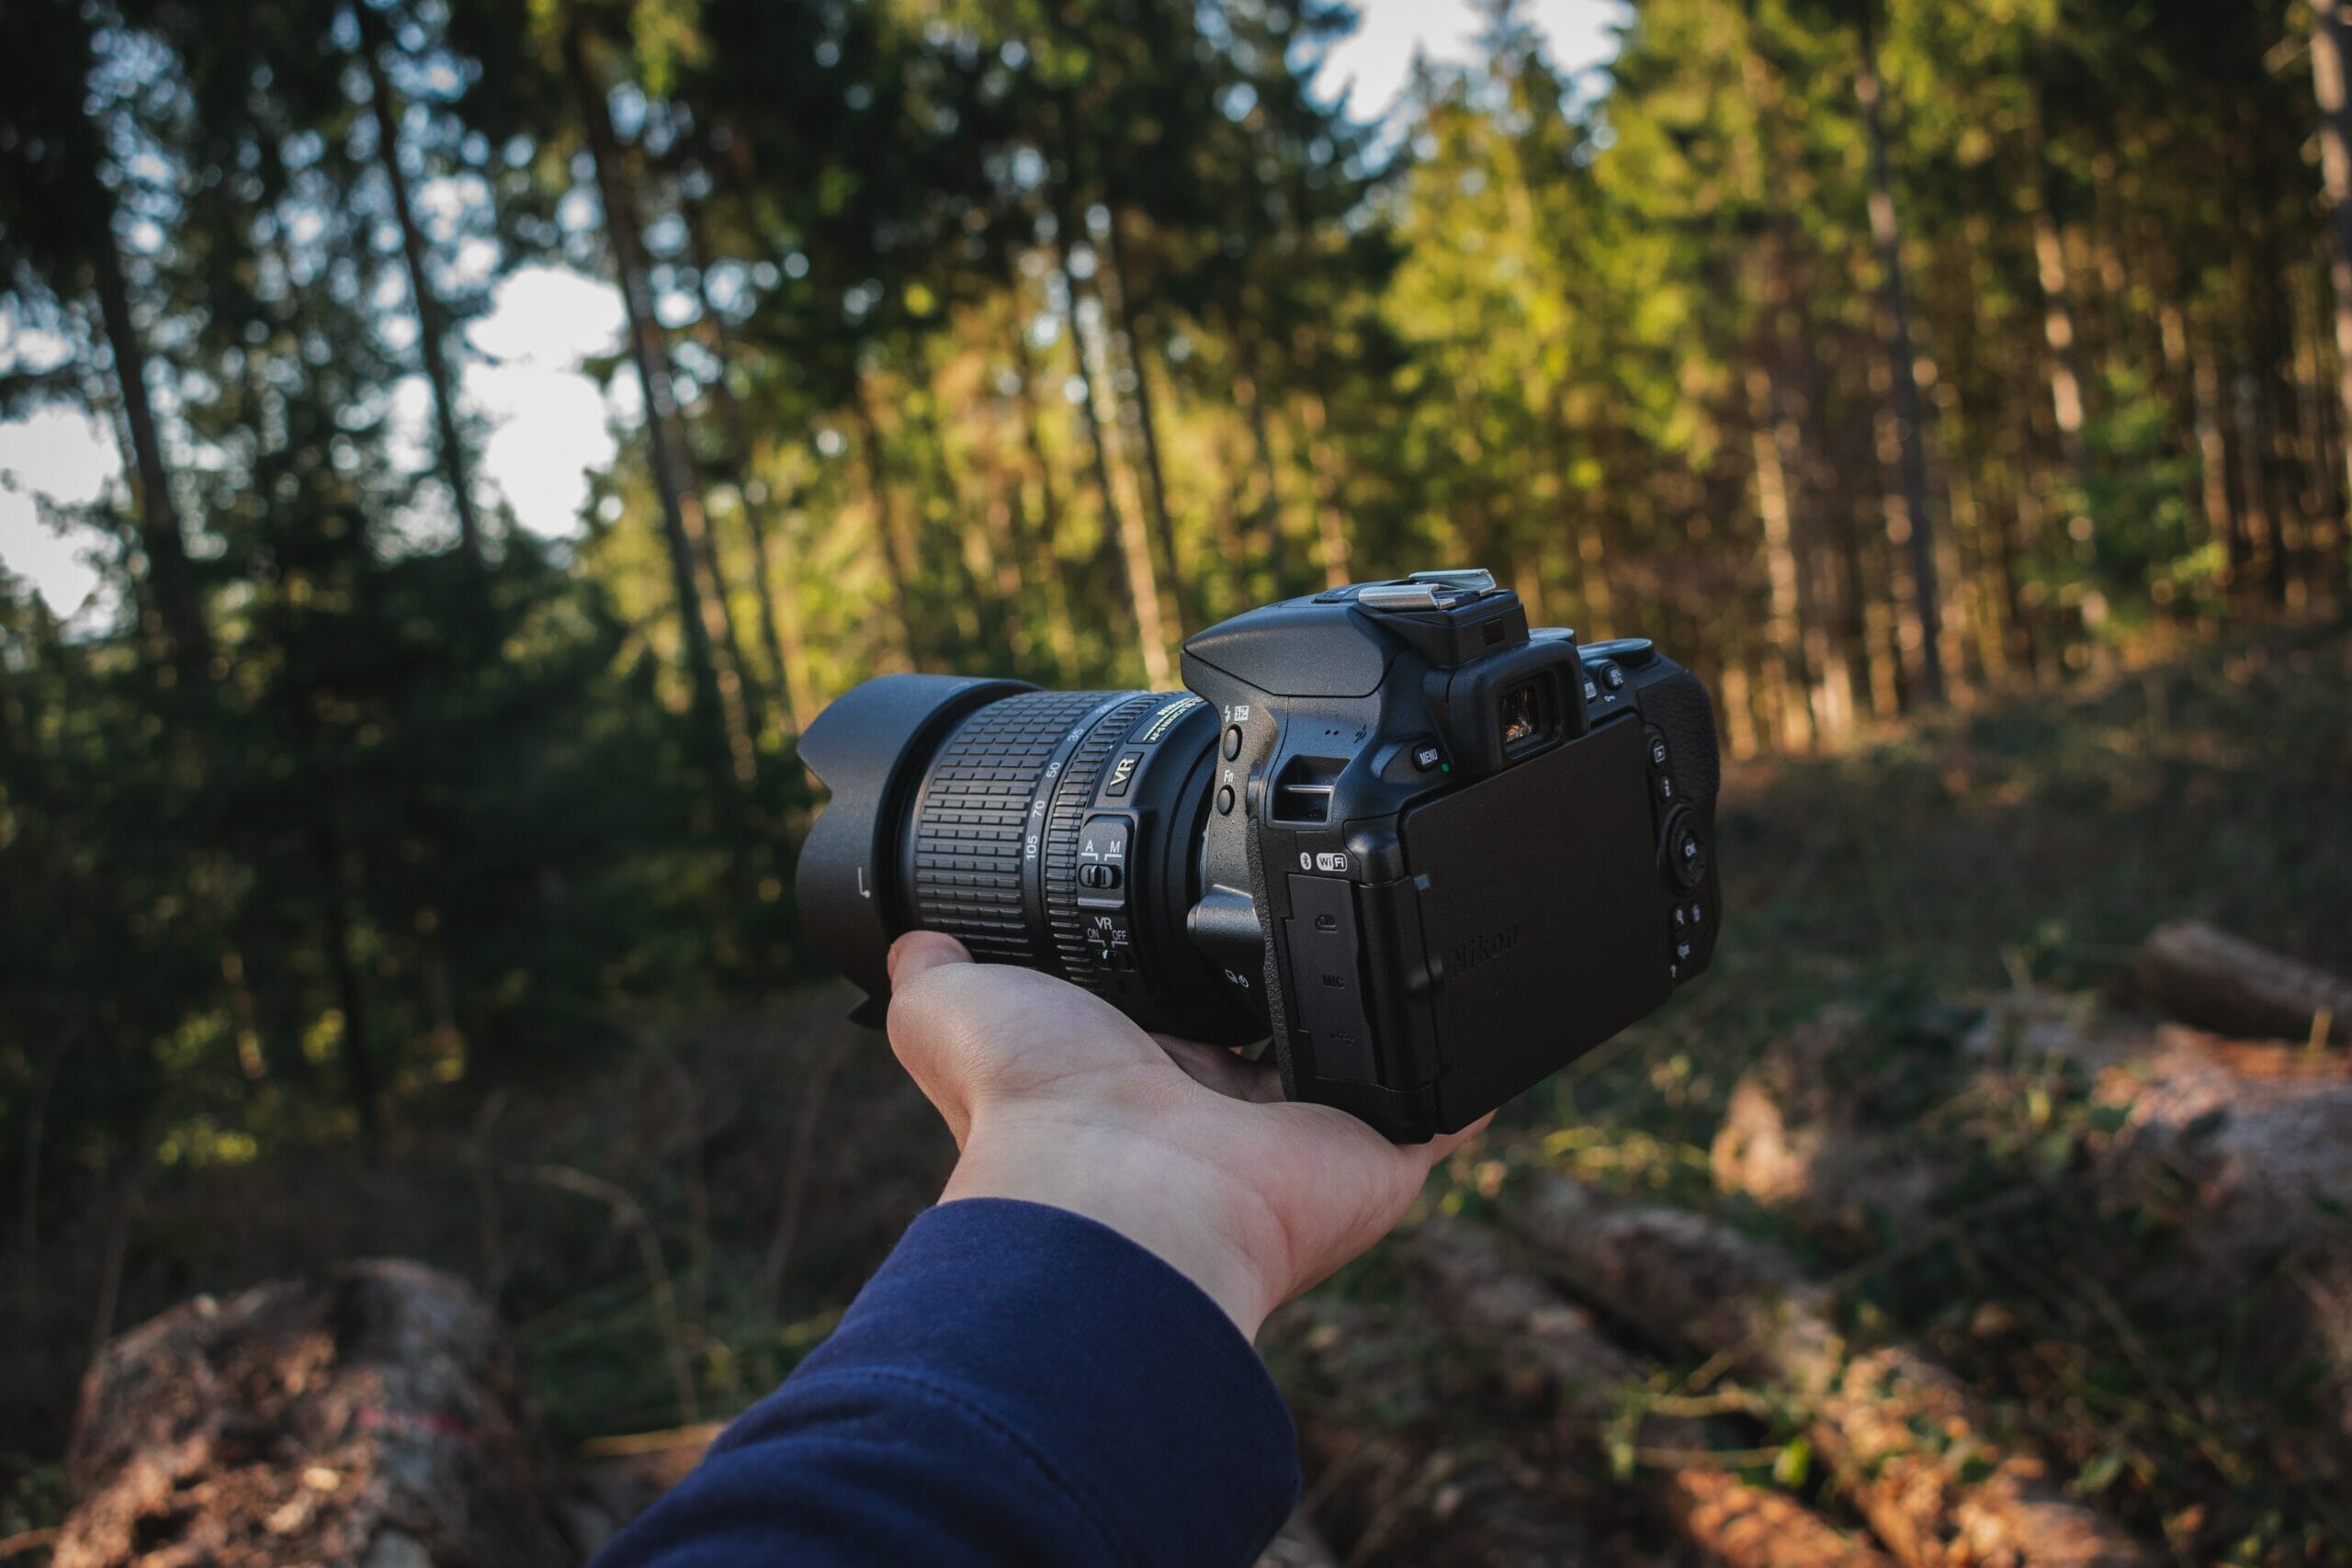 Nikon D5600 vs D3500: Which Entry-Level DSLR Is Right for You?